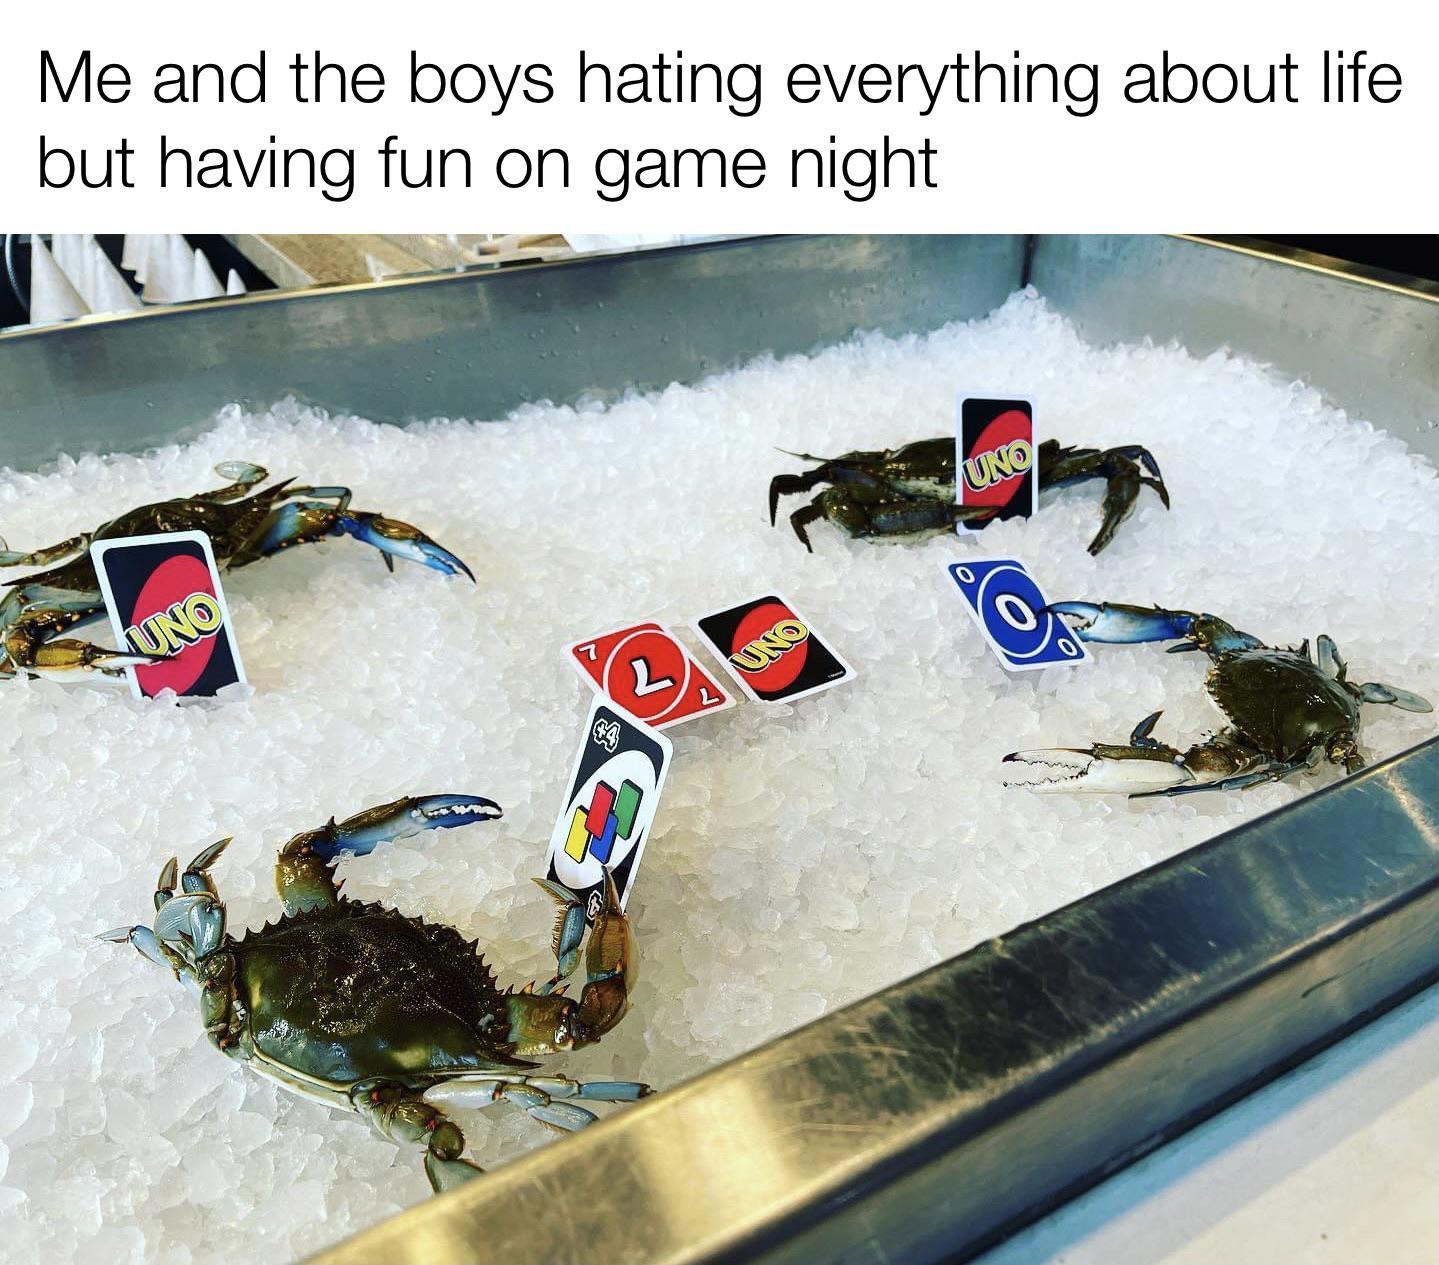 dank memes - Me and the boys hating everything about life but having fun on game night Uno Uno Uno Ole